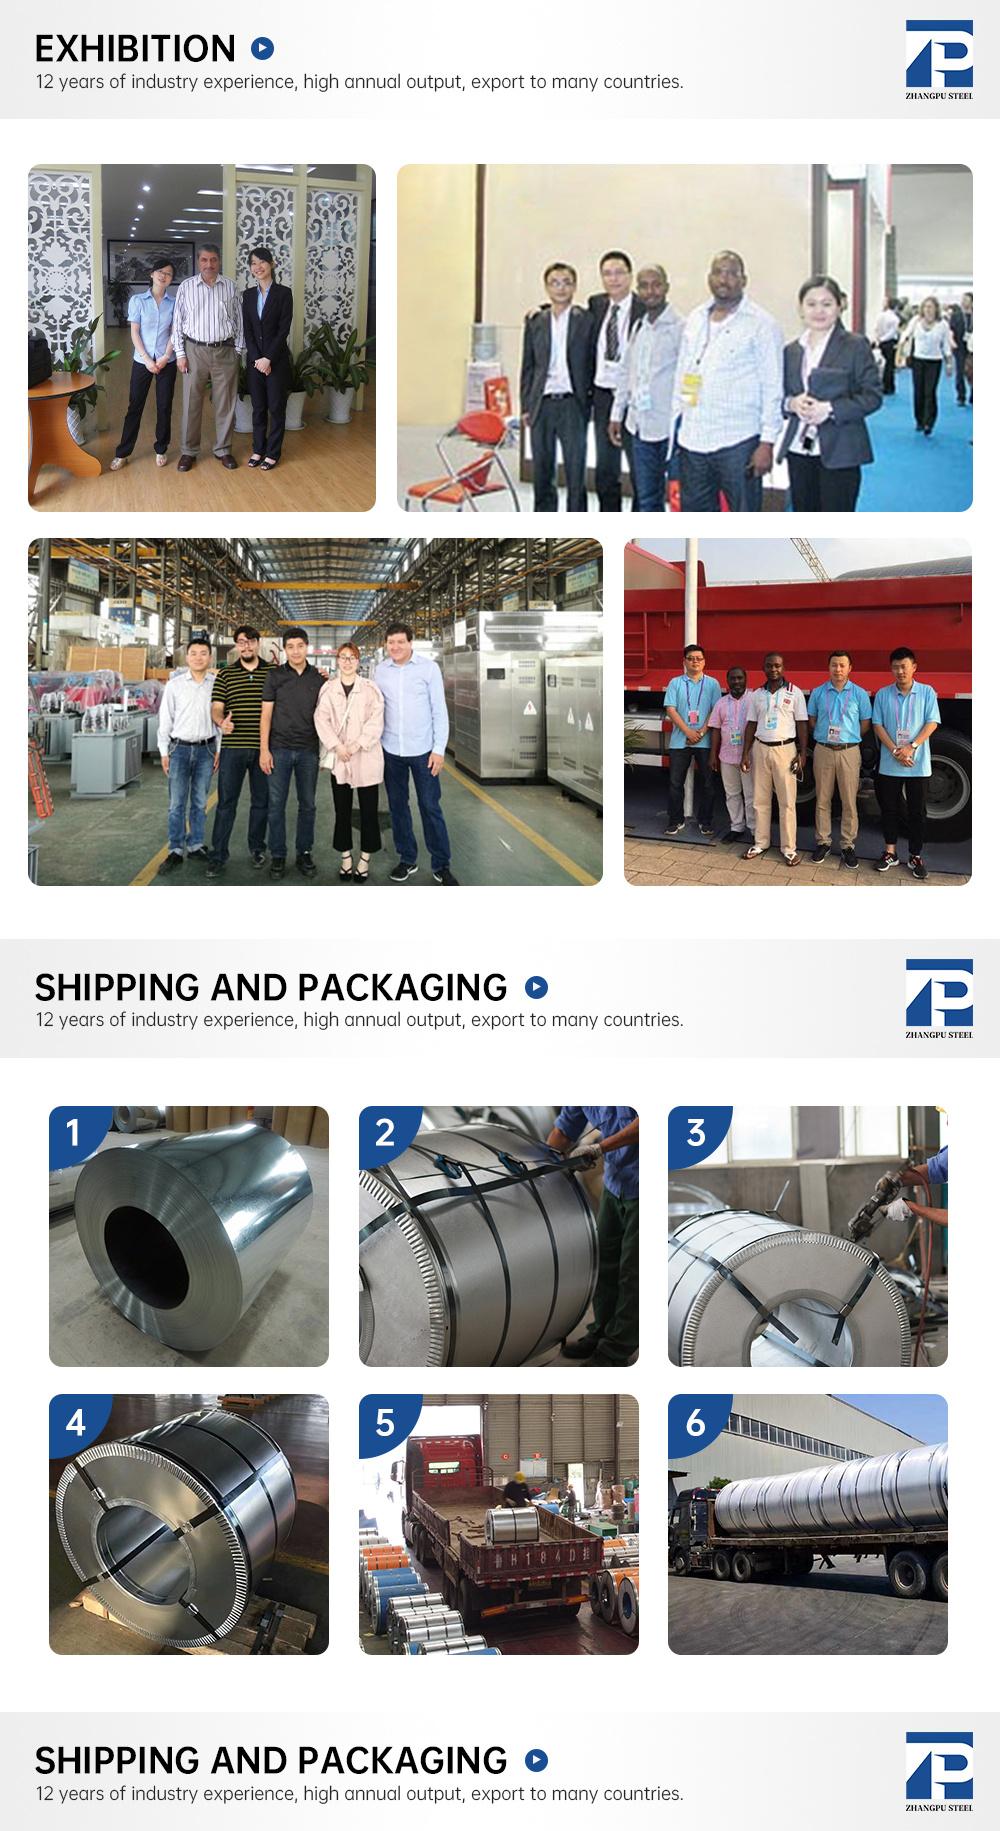 Prime Ral Color New Prepainted Galvanized Steel Coil, PPGI / PPGL / Hdgl / Hdgi, Roll Coil and Sheets